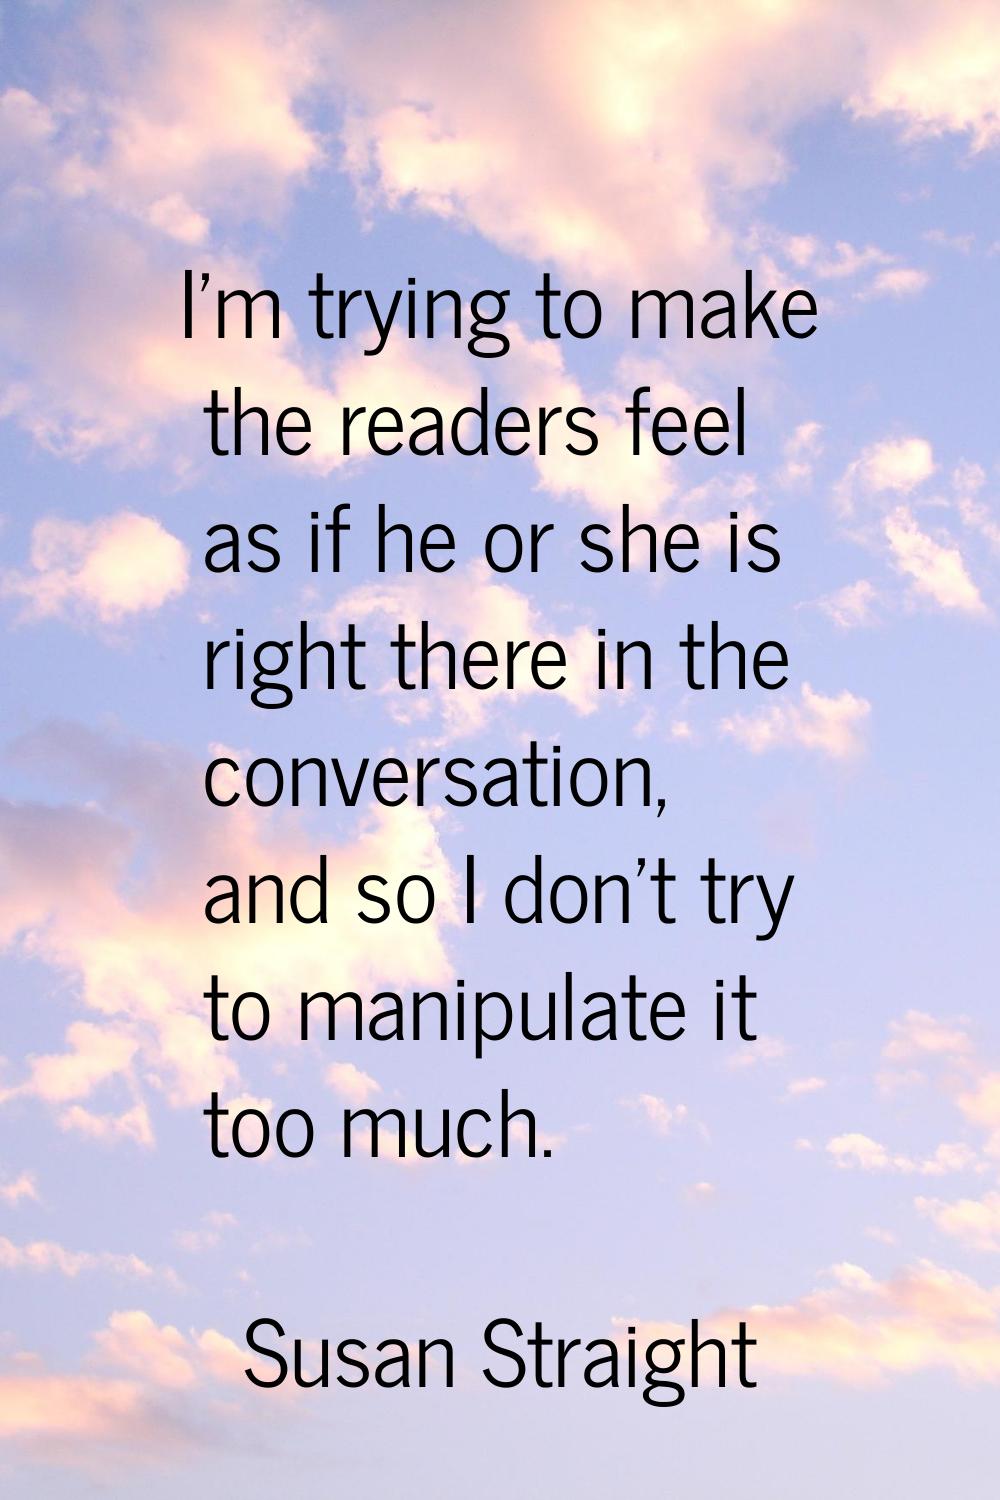 I'm trying to make the readers feel as if he or she is right there in the conversation, and so I do